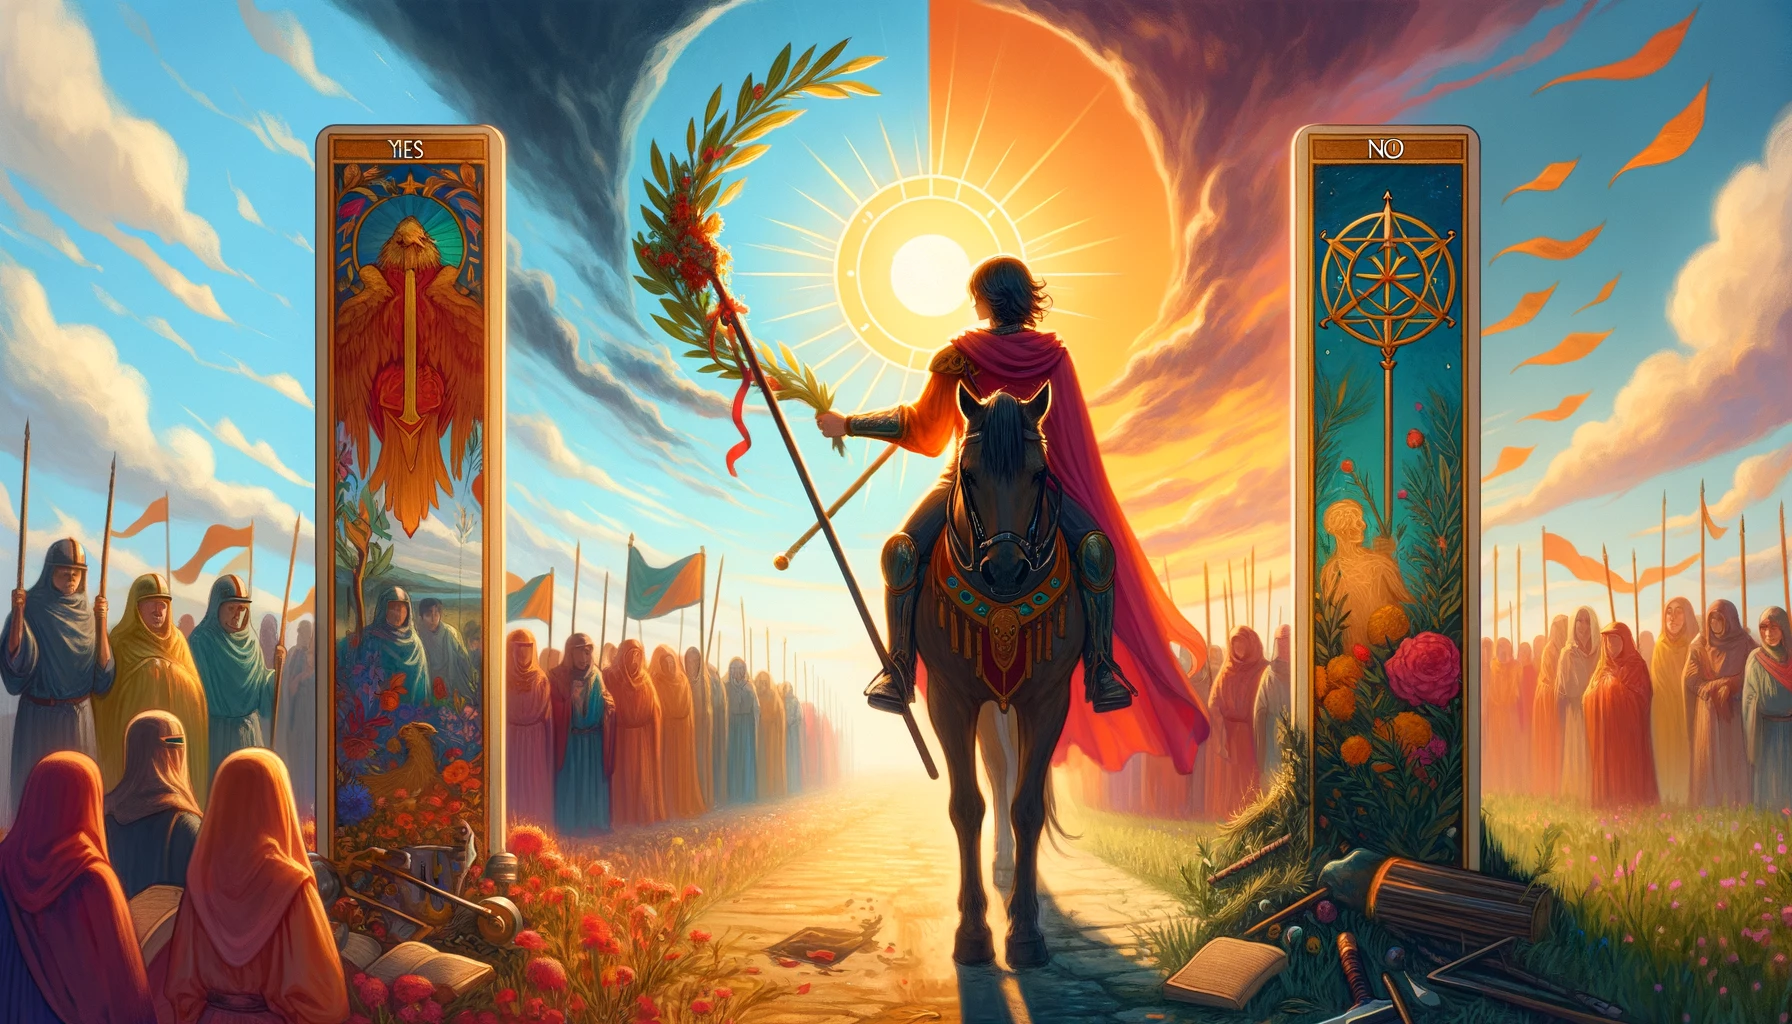 A visual representation showcasing the symbolism of success, recognition, and achievement in tarot readings. One side depicts a figure basking in victory and acclaim amidst a vibrant celebration, while the other reflects setbacks and the potential for growth, set against contrasting backdrops transitioning from vibrant celebration to contemplative introspection, symbolizing the dual nature of tarot answers.